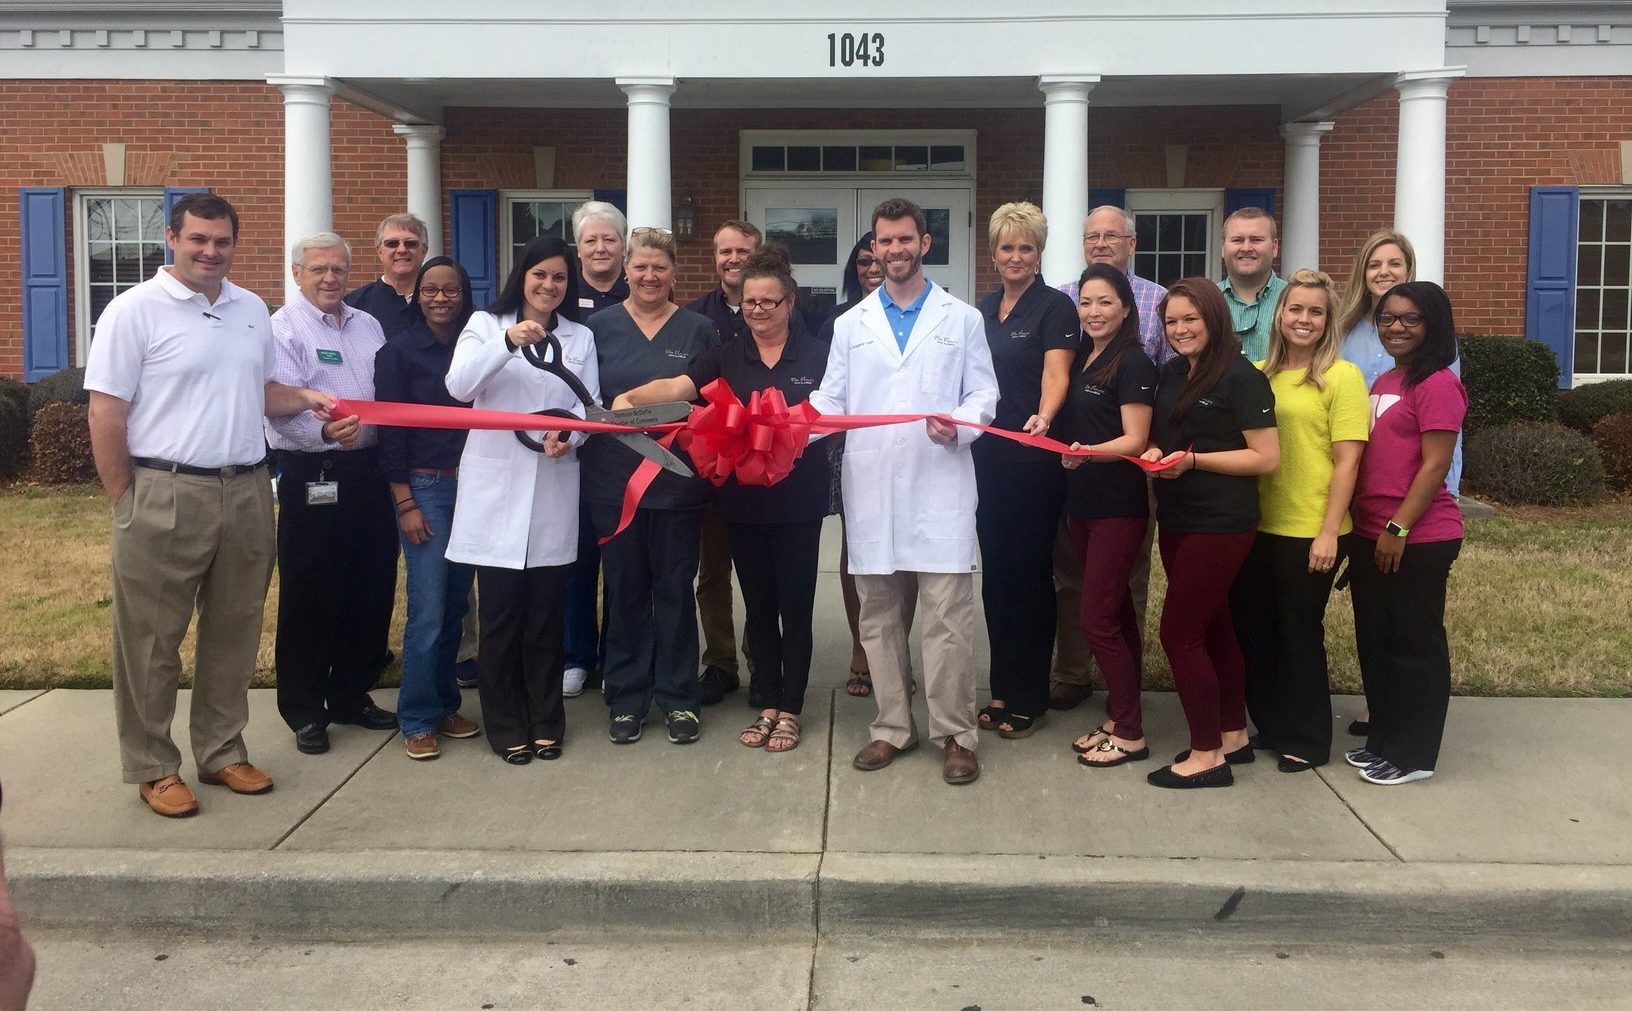 Da Vinci Foot & Ankle Announces Grand Opening in the West Augusta Area